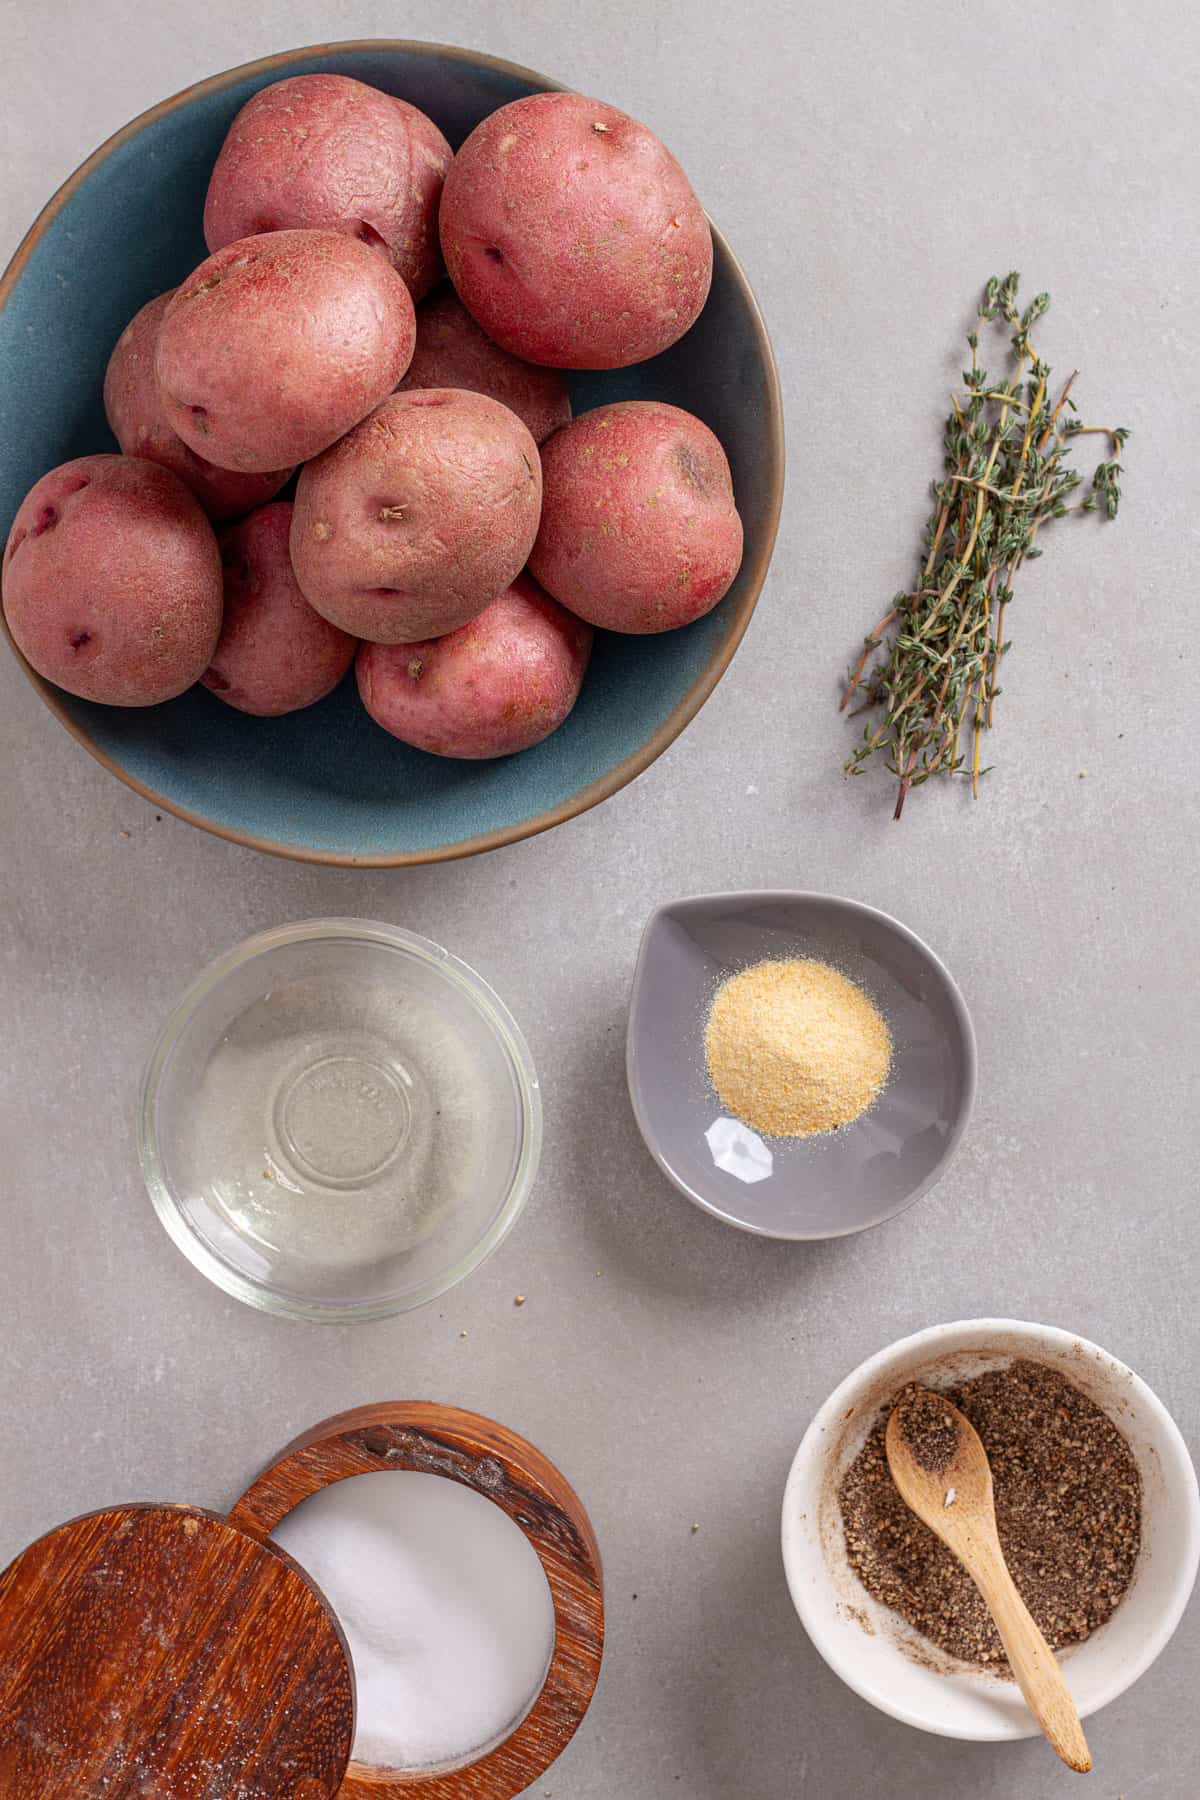 Ingredients for seasoned air fried red potatoes on a gray table.